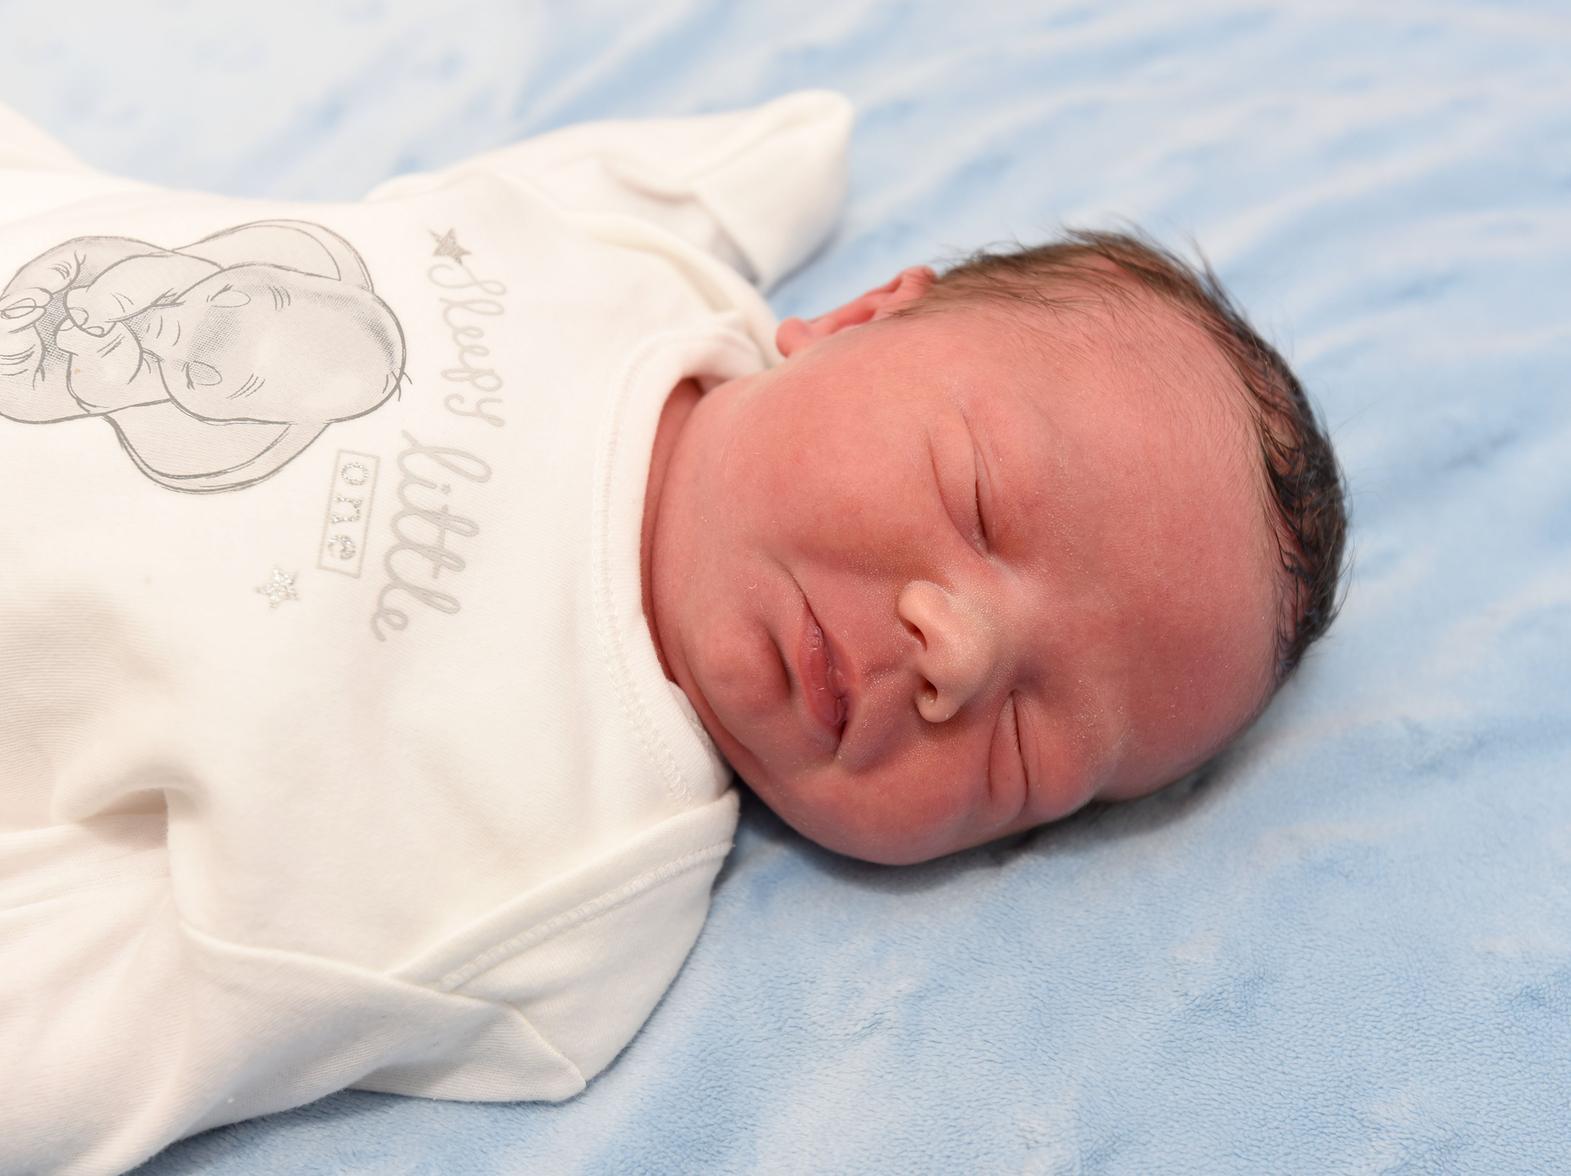 Joey James Ambrose was born on January 5 at 6.34pm, weighing 8lb, to Abbie Halsall and Nathan Ambrose, from Chorley